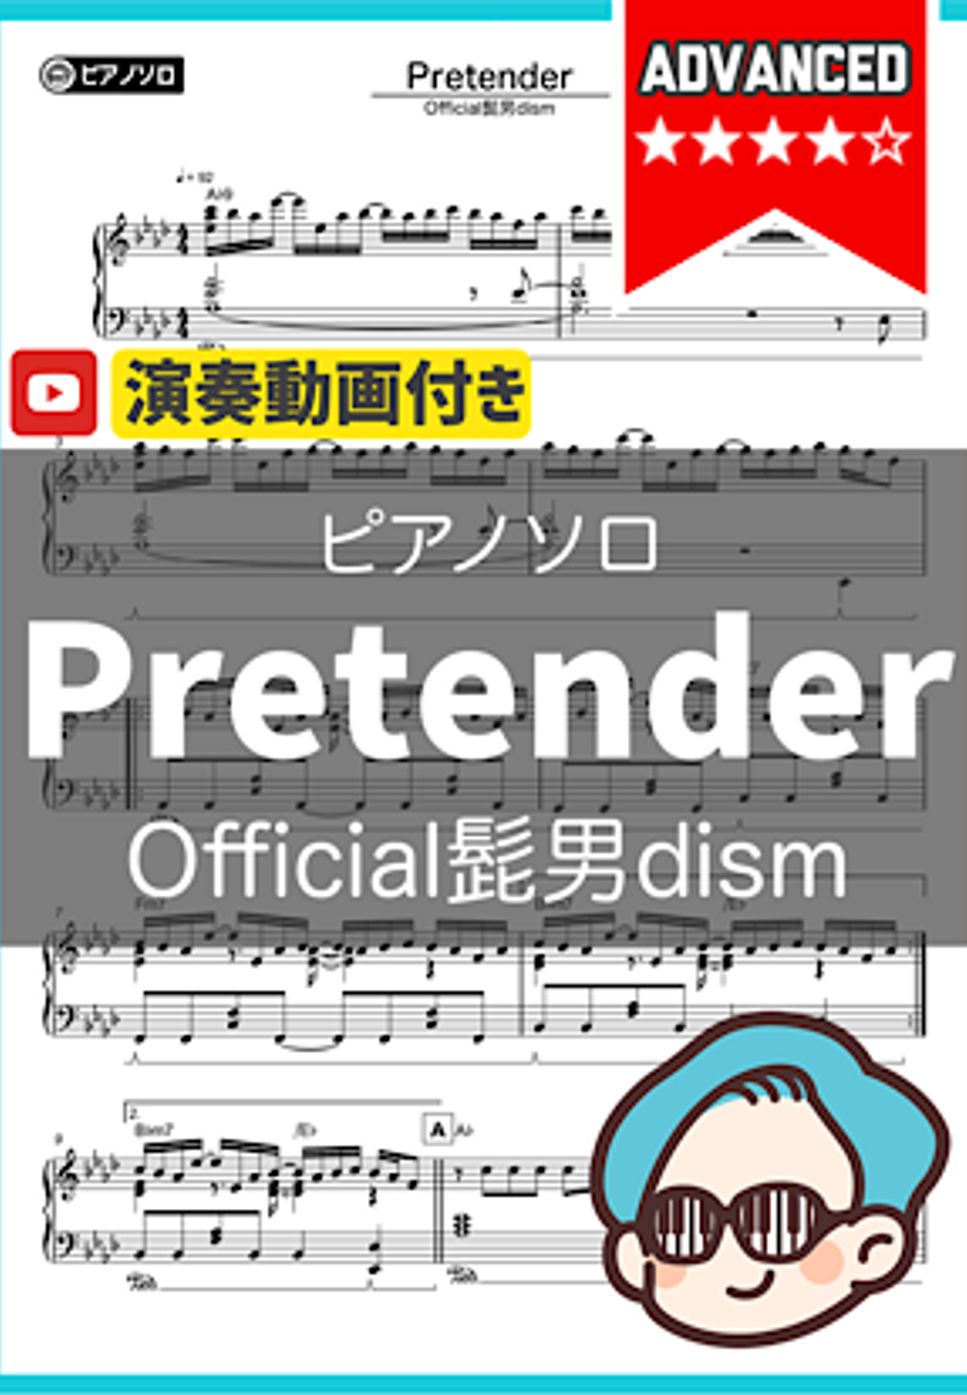 Official髭男dism - Pretender by THETA